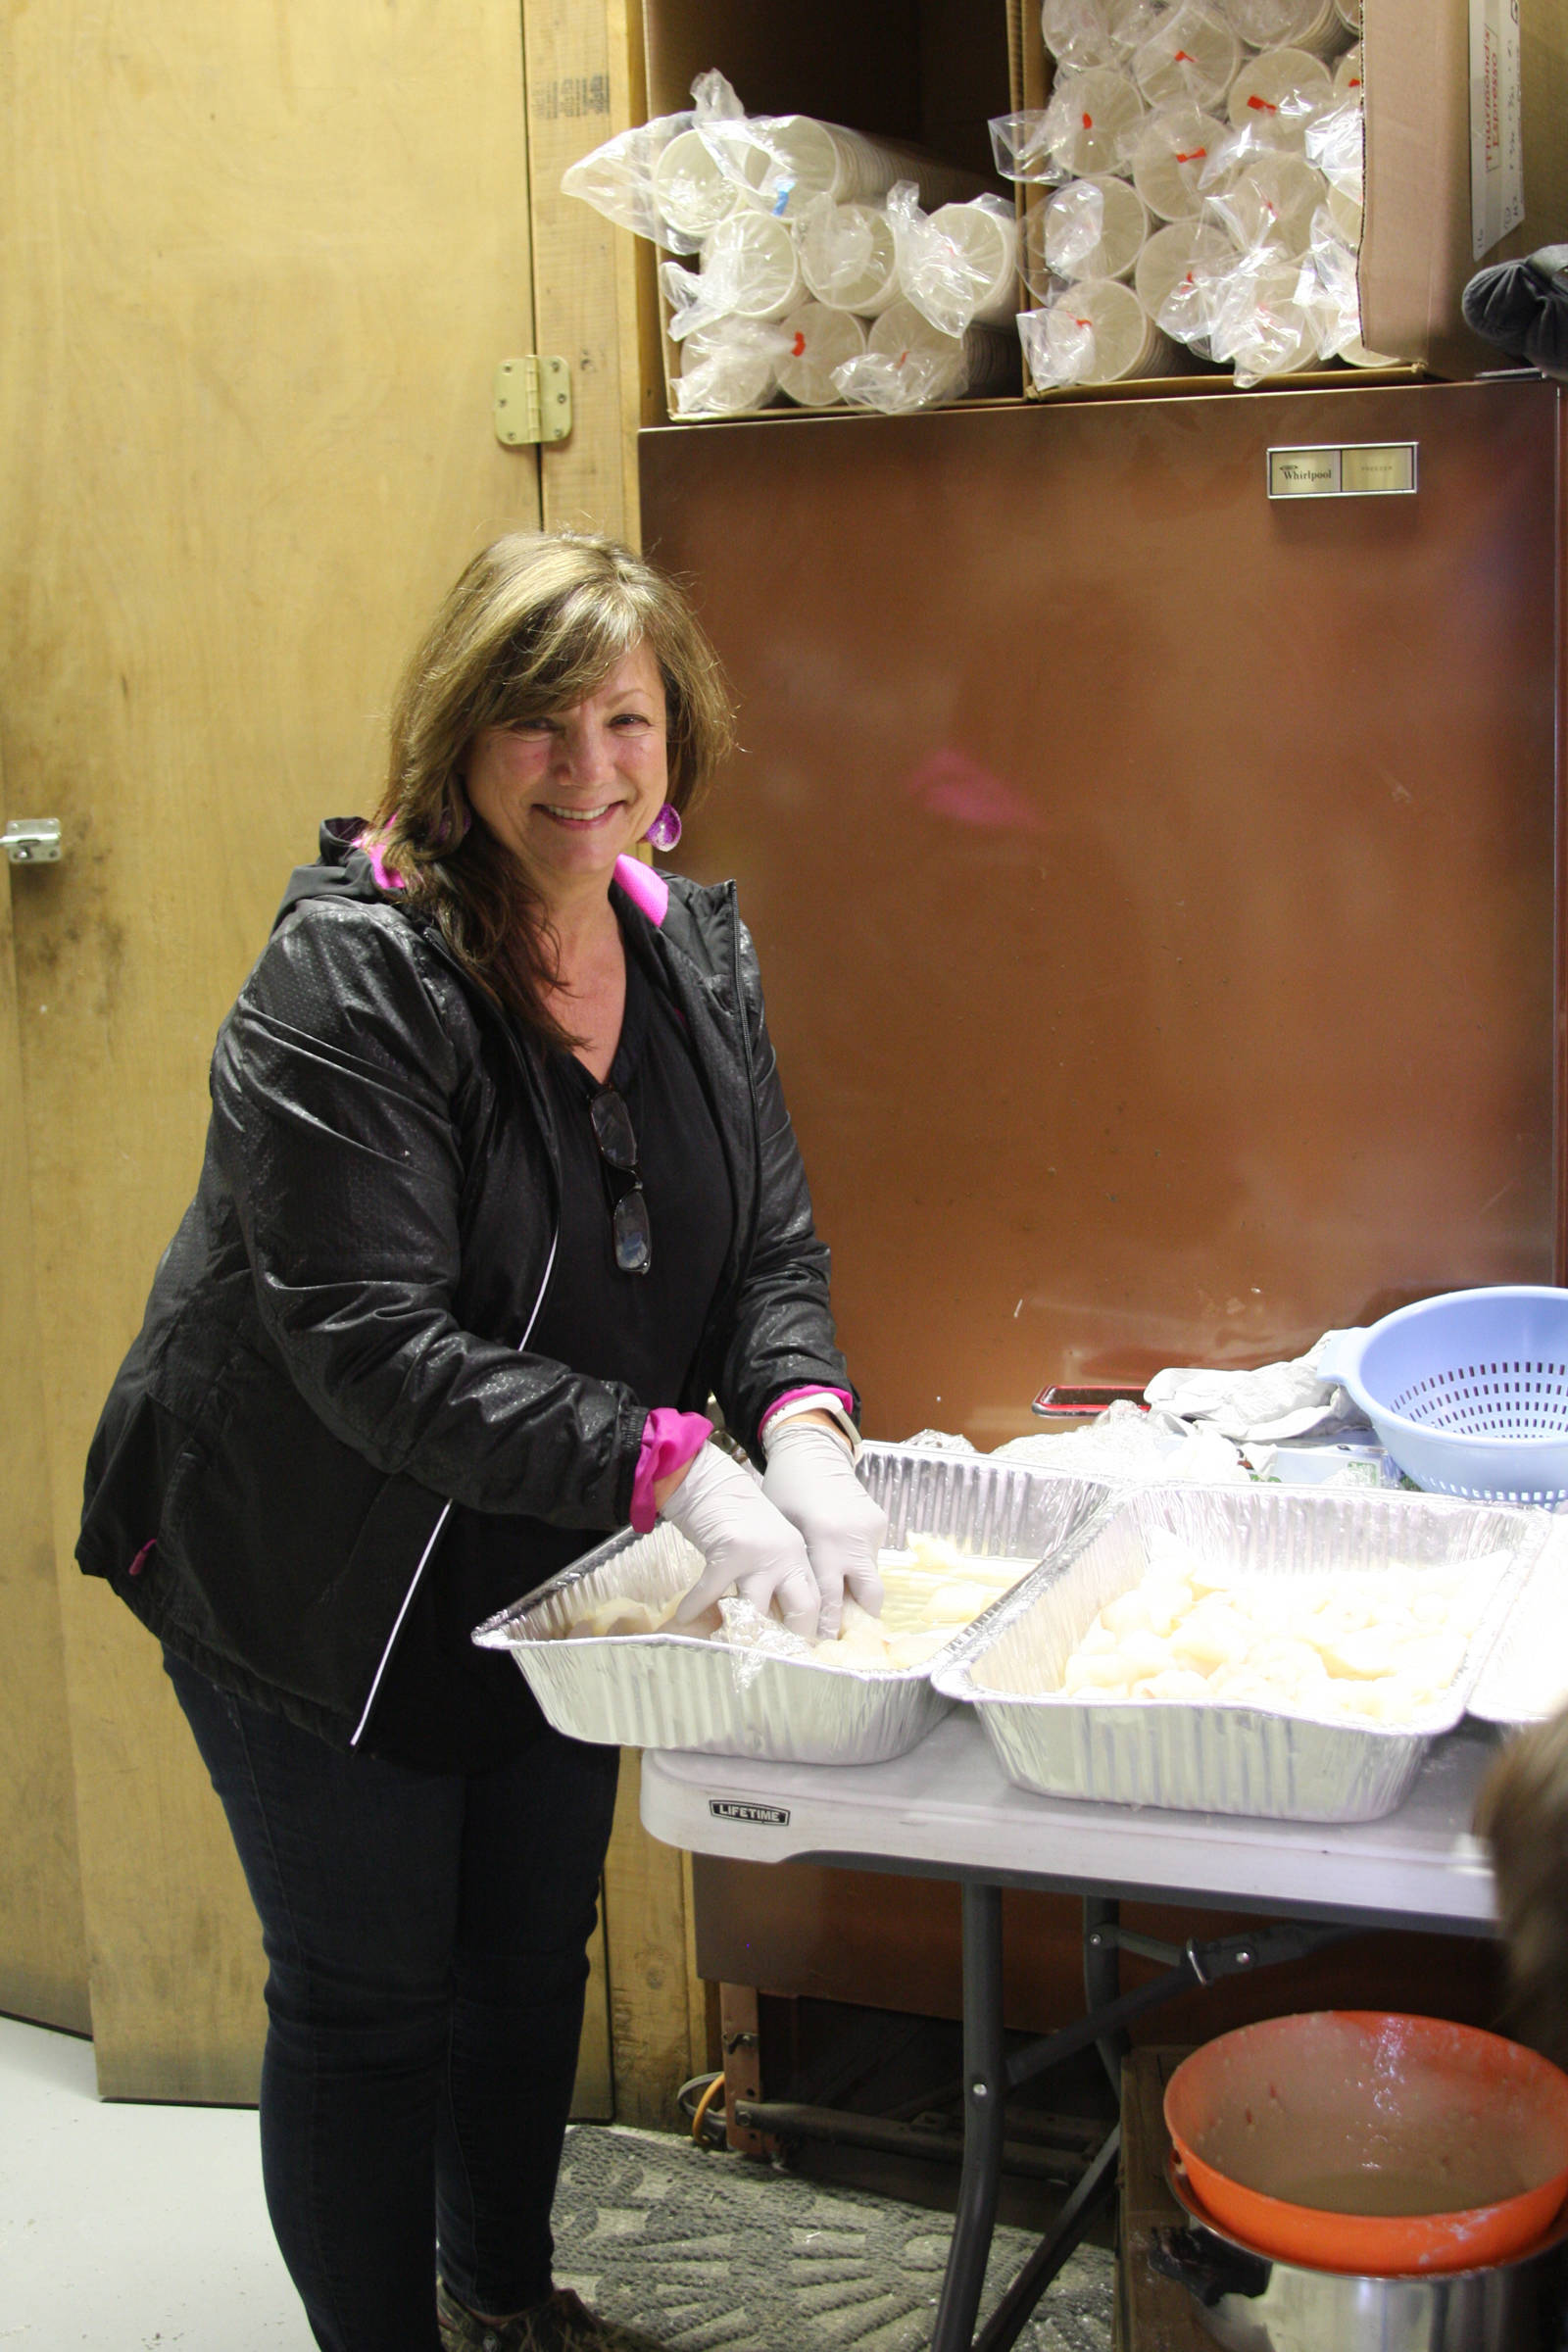 Elaine Griner helps prepare freshly caught halibut for the fifth annual Customer Appreciation Day and 50th anniversary celebration on Saturday, May 25 at Thurmond’s Far West Auto in Anchor Point, Alaska. (Photo by Delcenia Cosman)